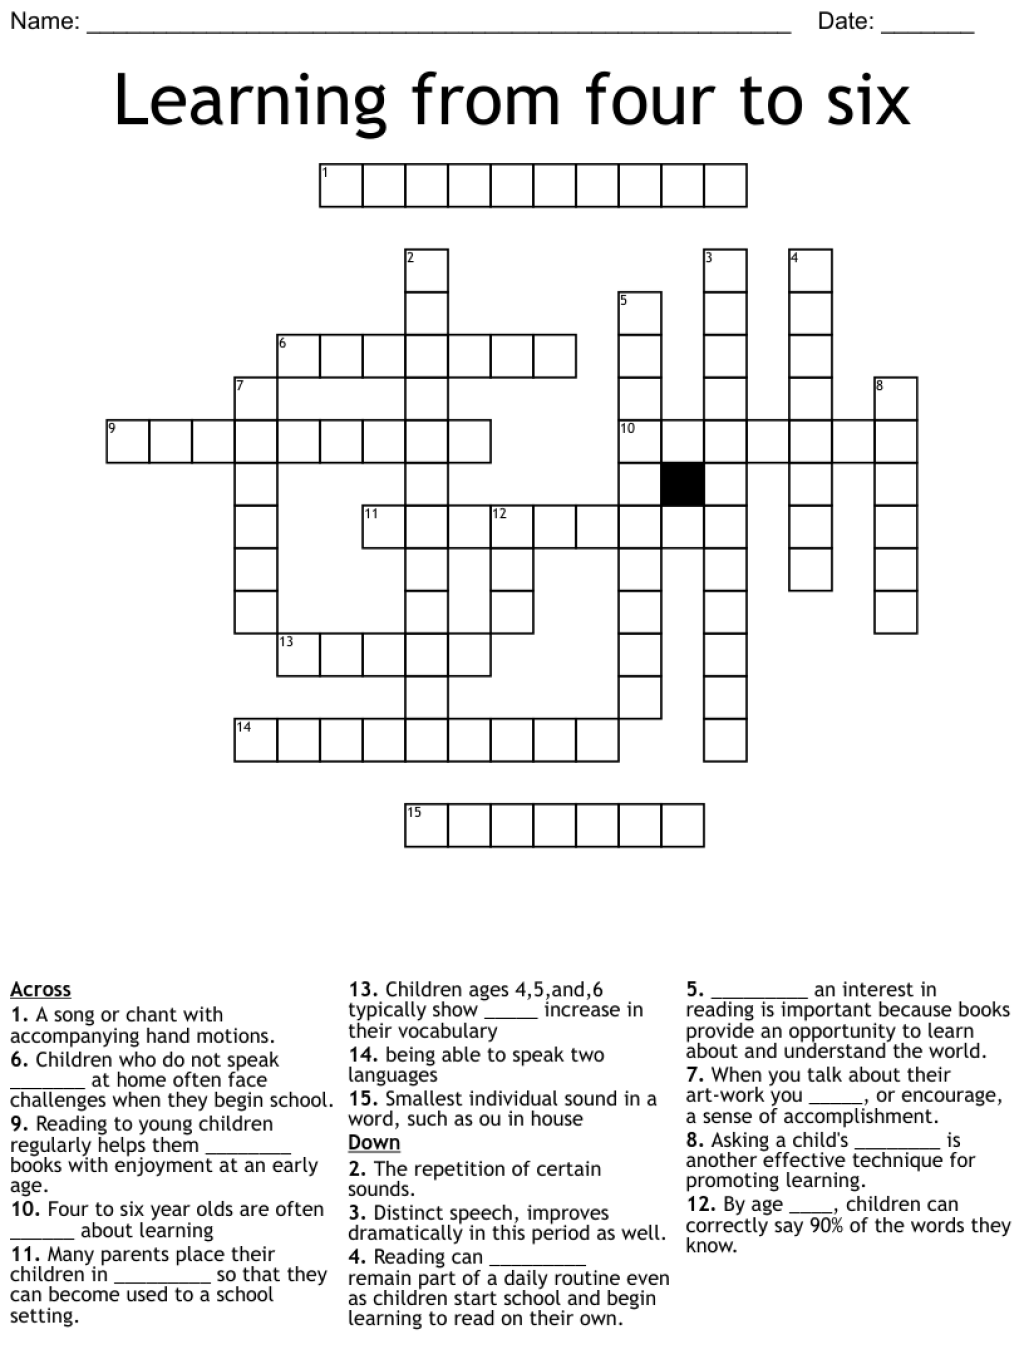 Picture of: Learning from four to six Crossword – WordMint